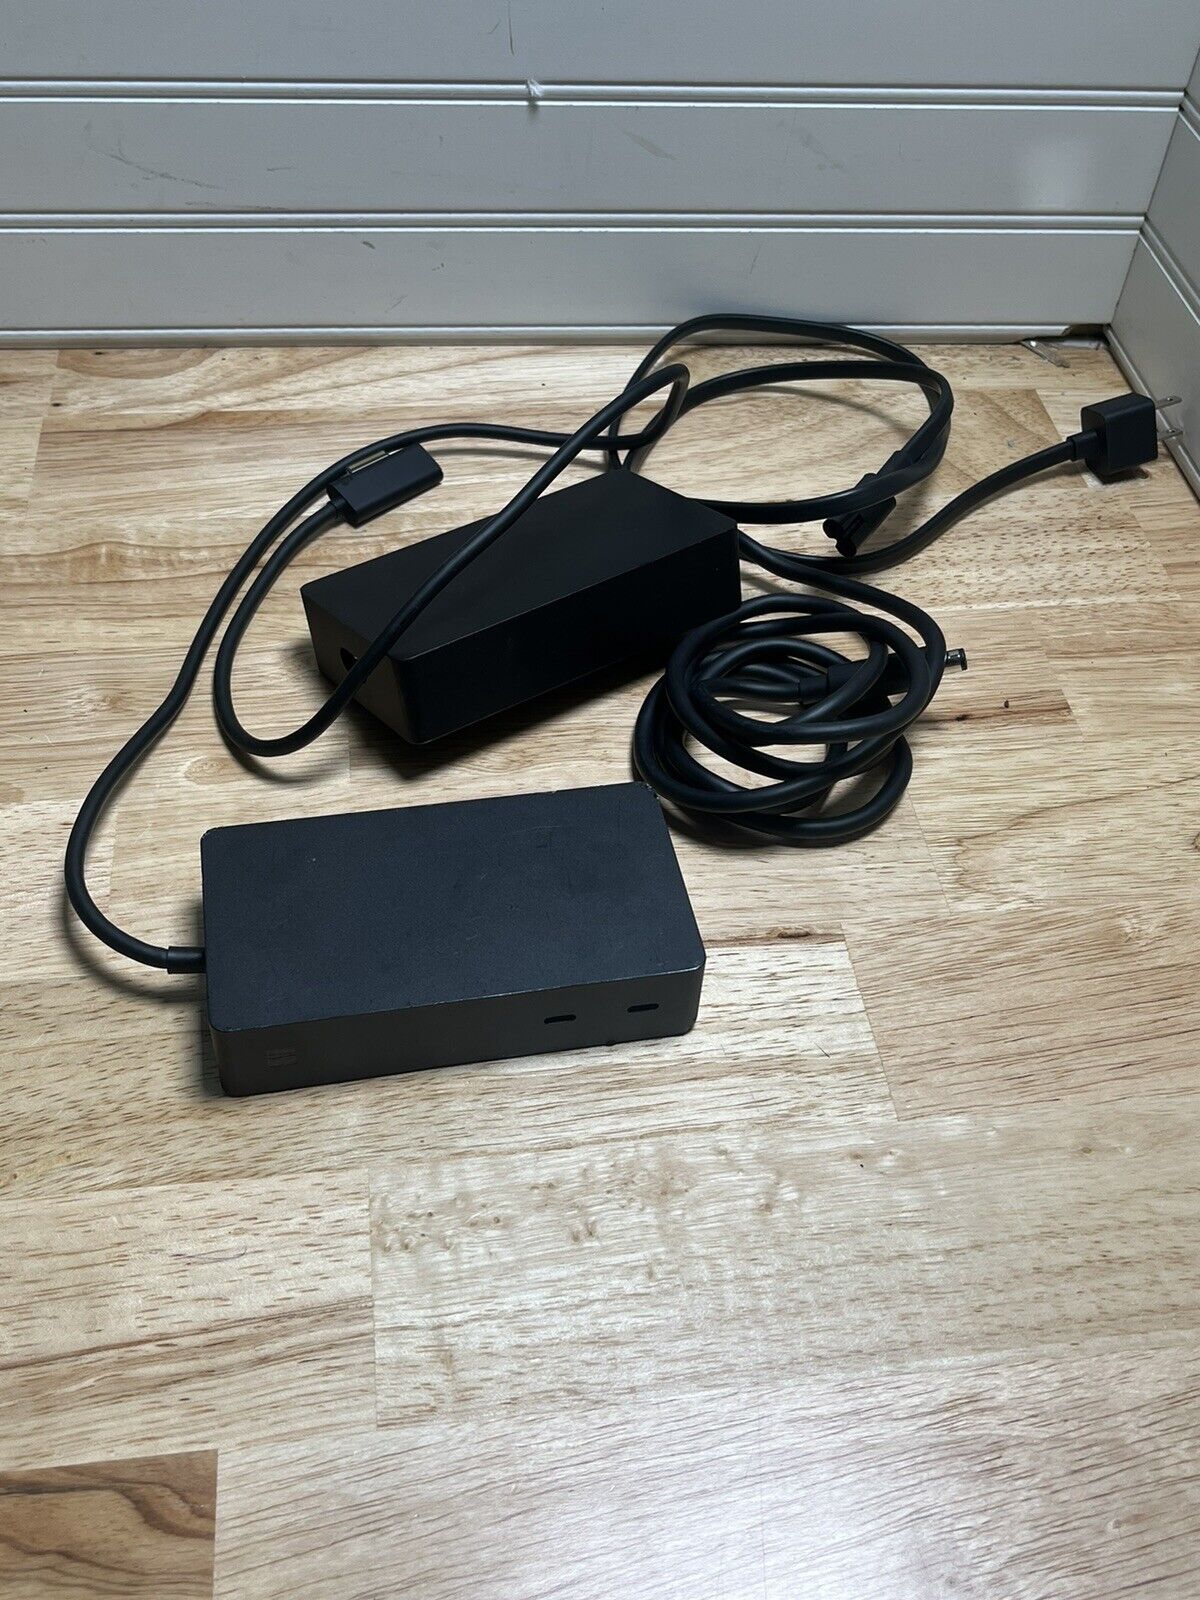 Microsoft Surface Dock 2 Docking Station, Black USB C - Model 1917 With Charger 